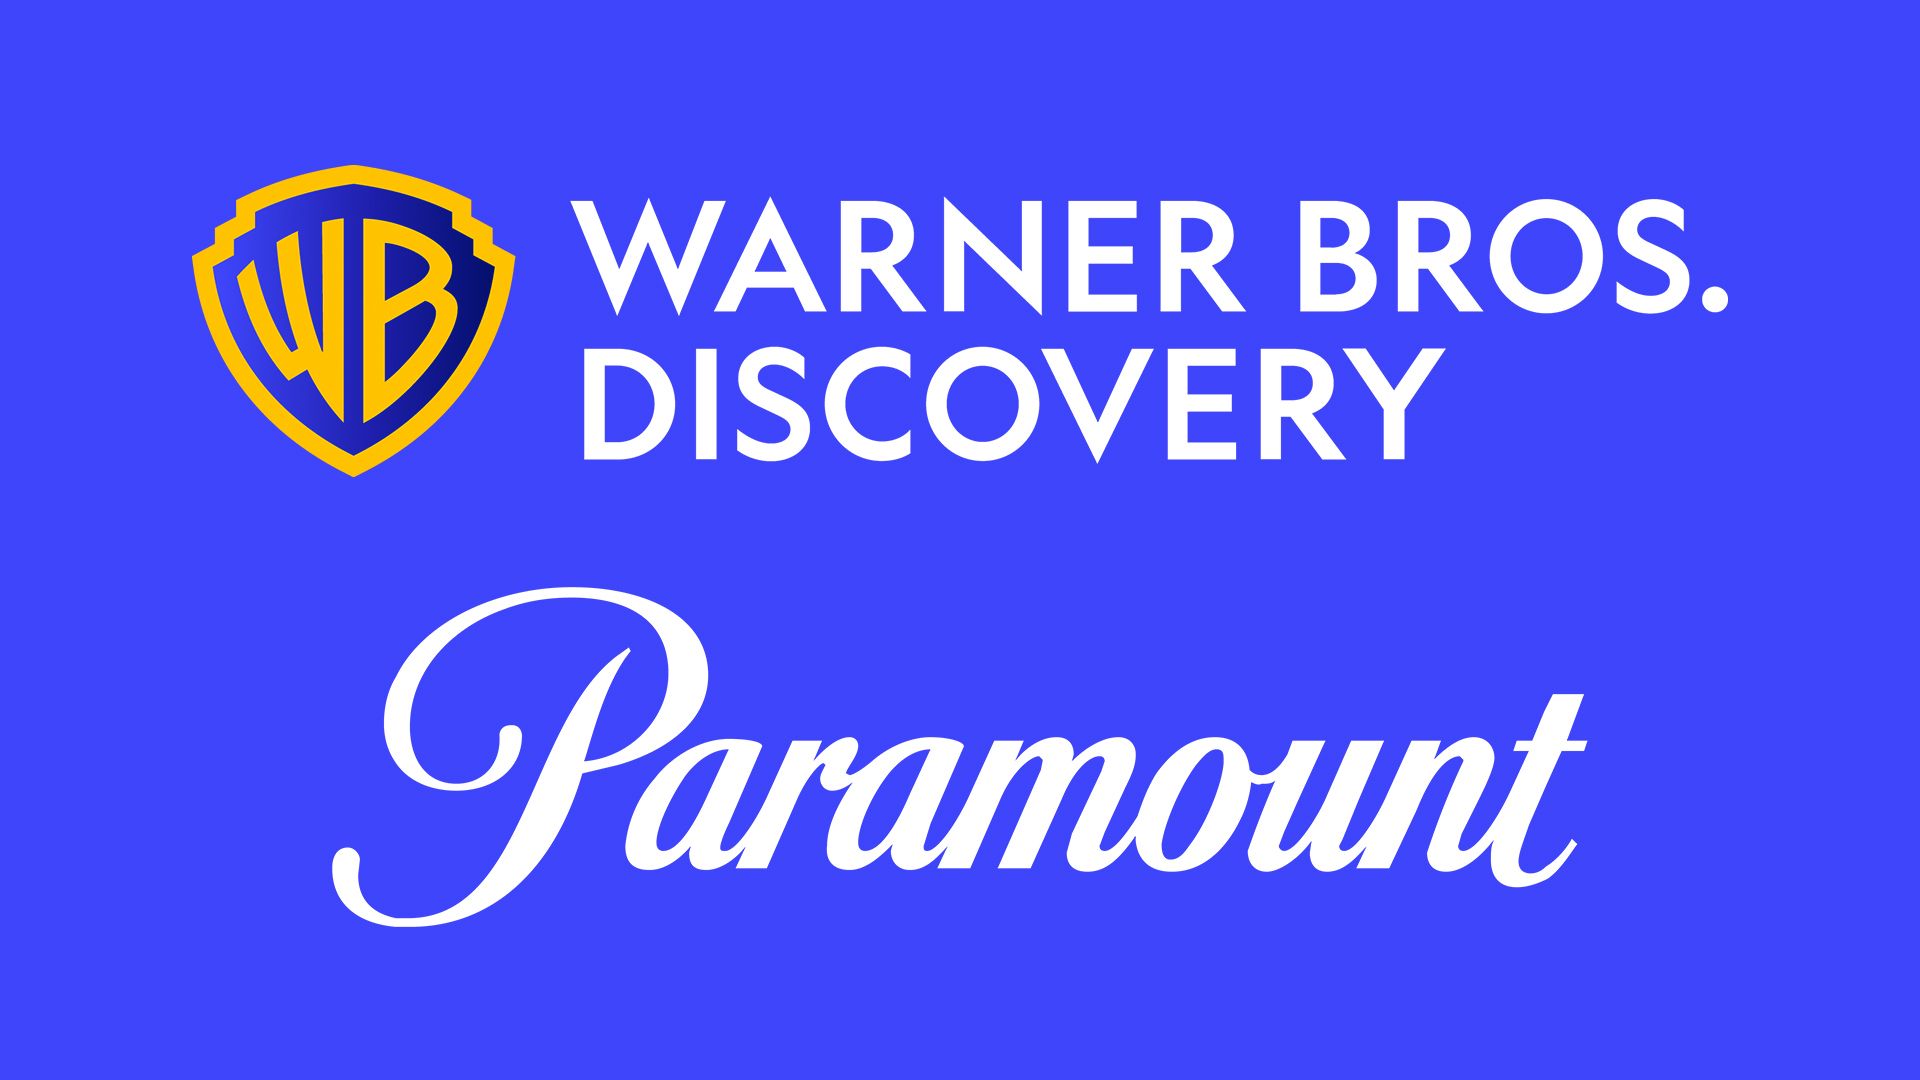 WarnerMedia, Discovery complete merger, become Warner Bros. Discovery